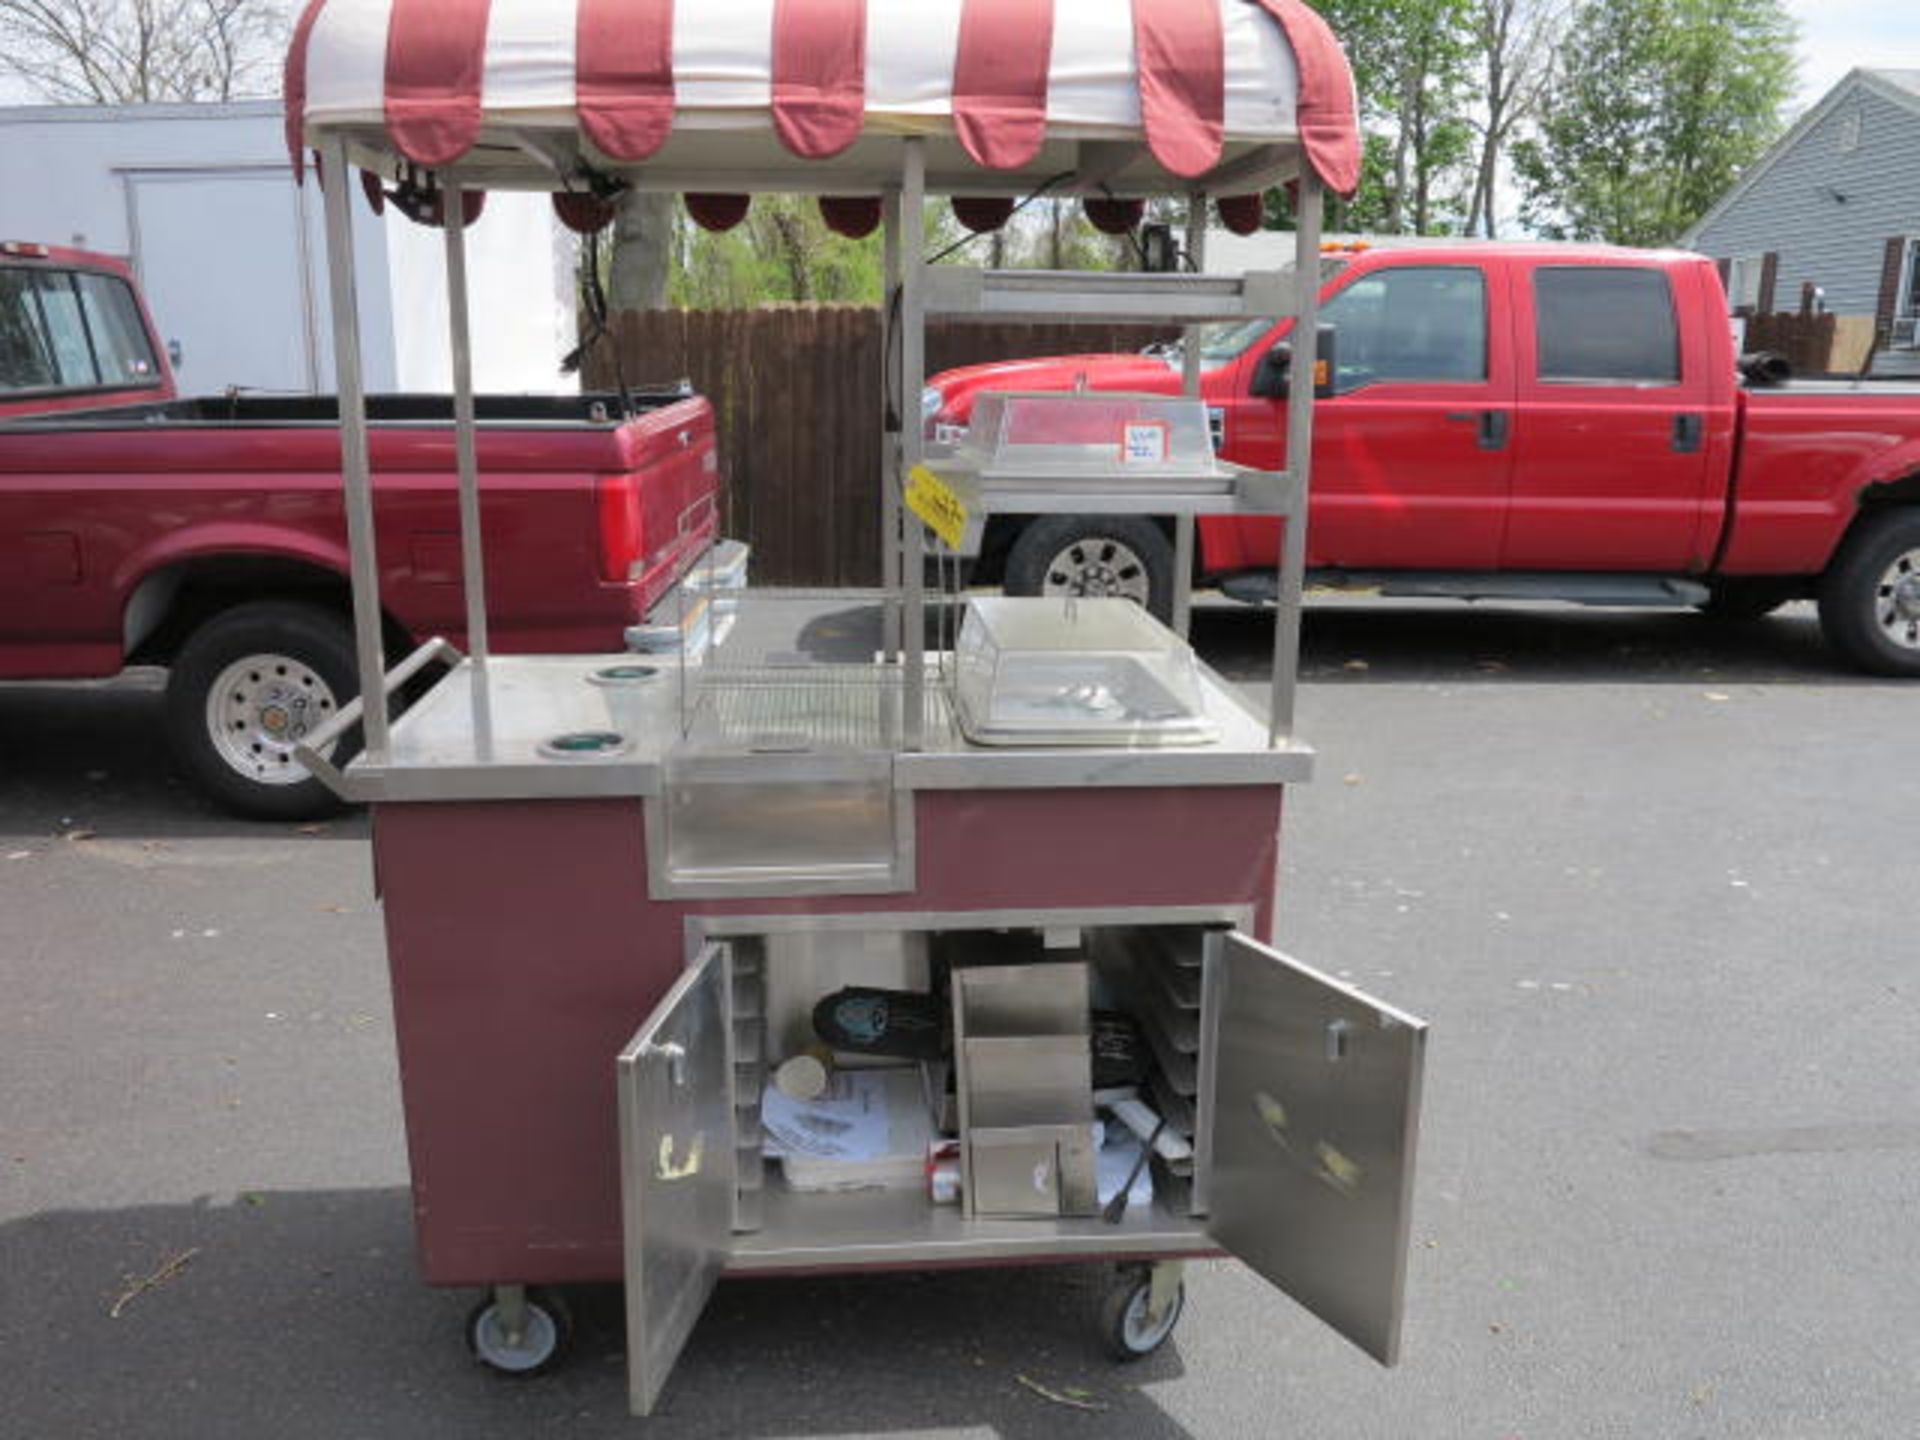 Coffee Cater Concession Cart with Side Cash Register, LED Lights, Shelving, Canopy, Paper Cup